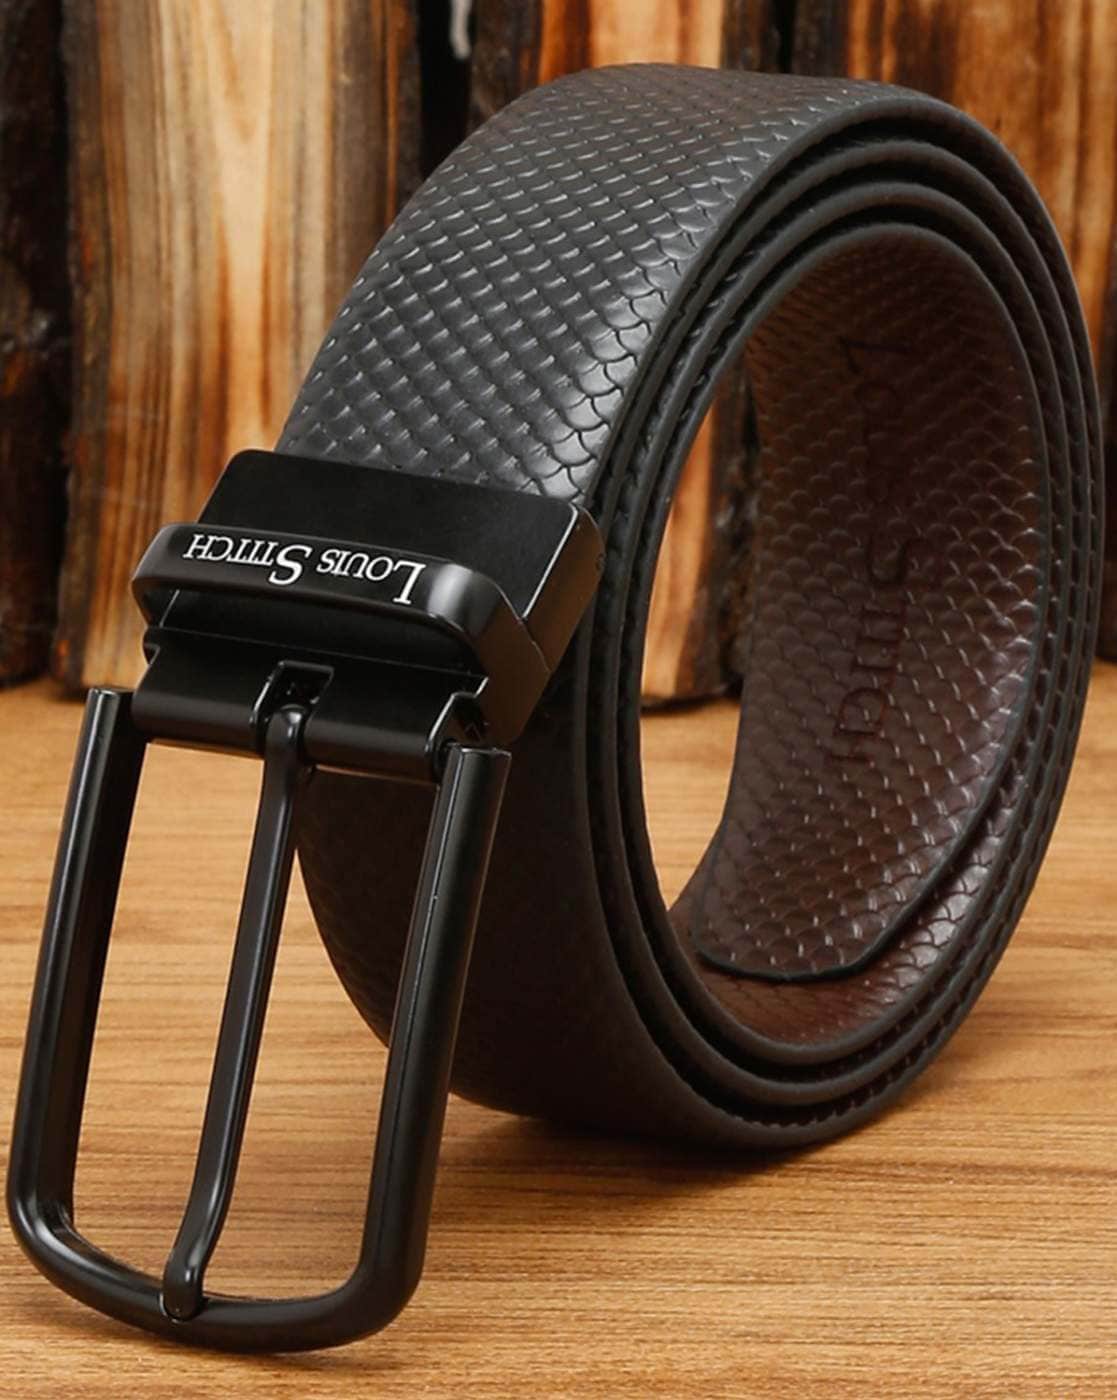 Buy online Jet Black Leather Belt from Accessories for Men by Louis Stitch  for ₹700 at 72% off